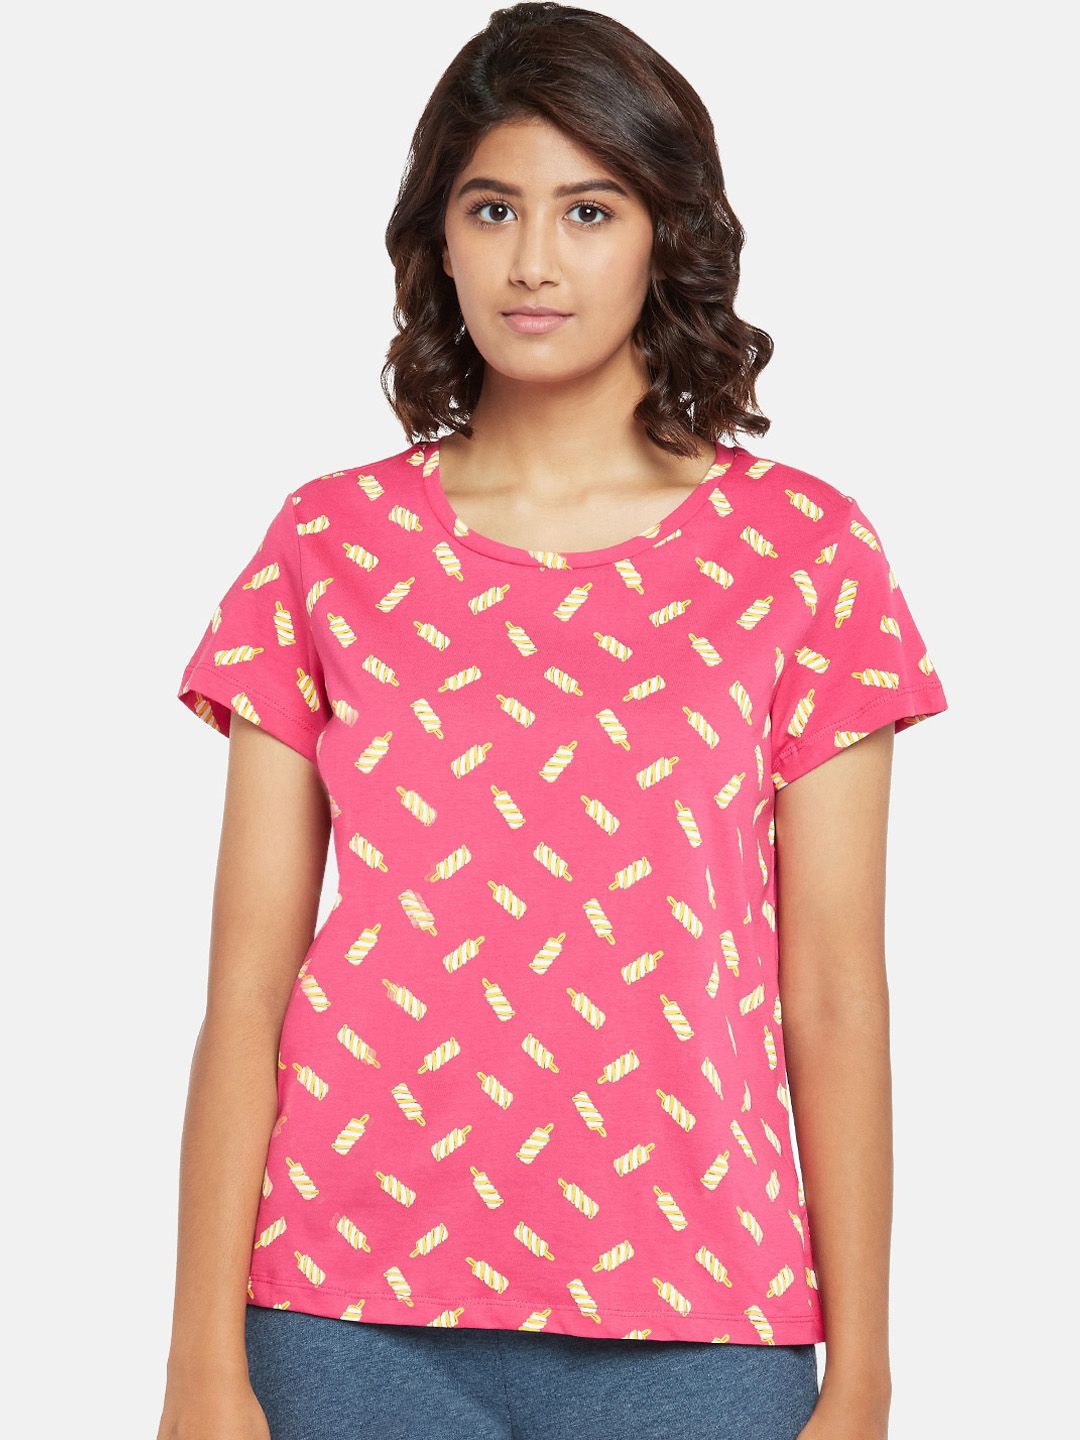 Dreamz by Pantaloons Women Pink Printed Pure Cotton Lounge T-shirt Price in India